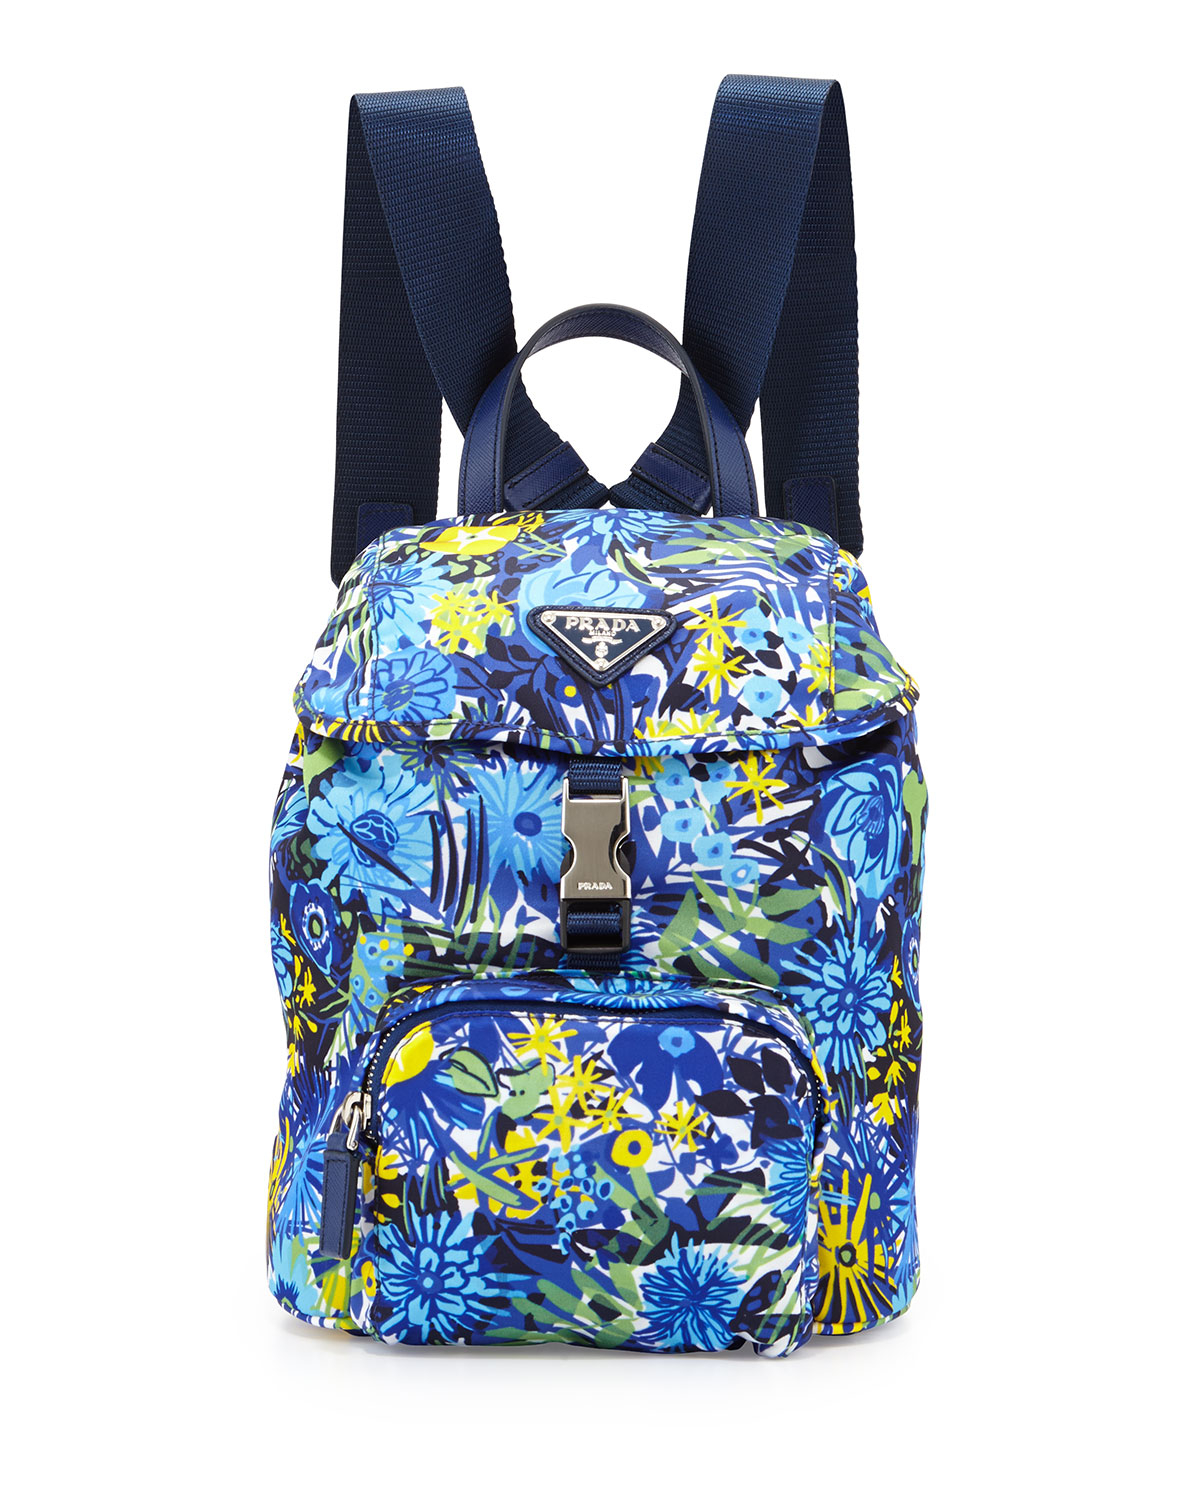 Prada Nylon Small Floral-Print Backpack in Blue | Lyst  